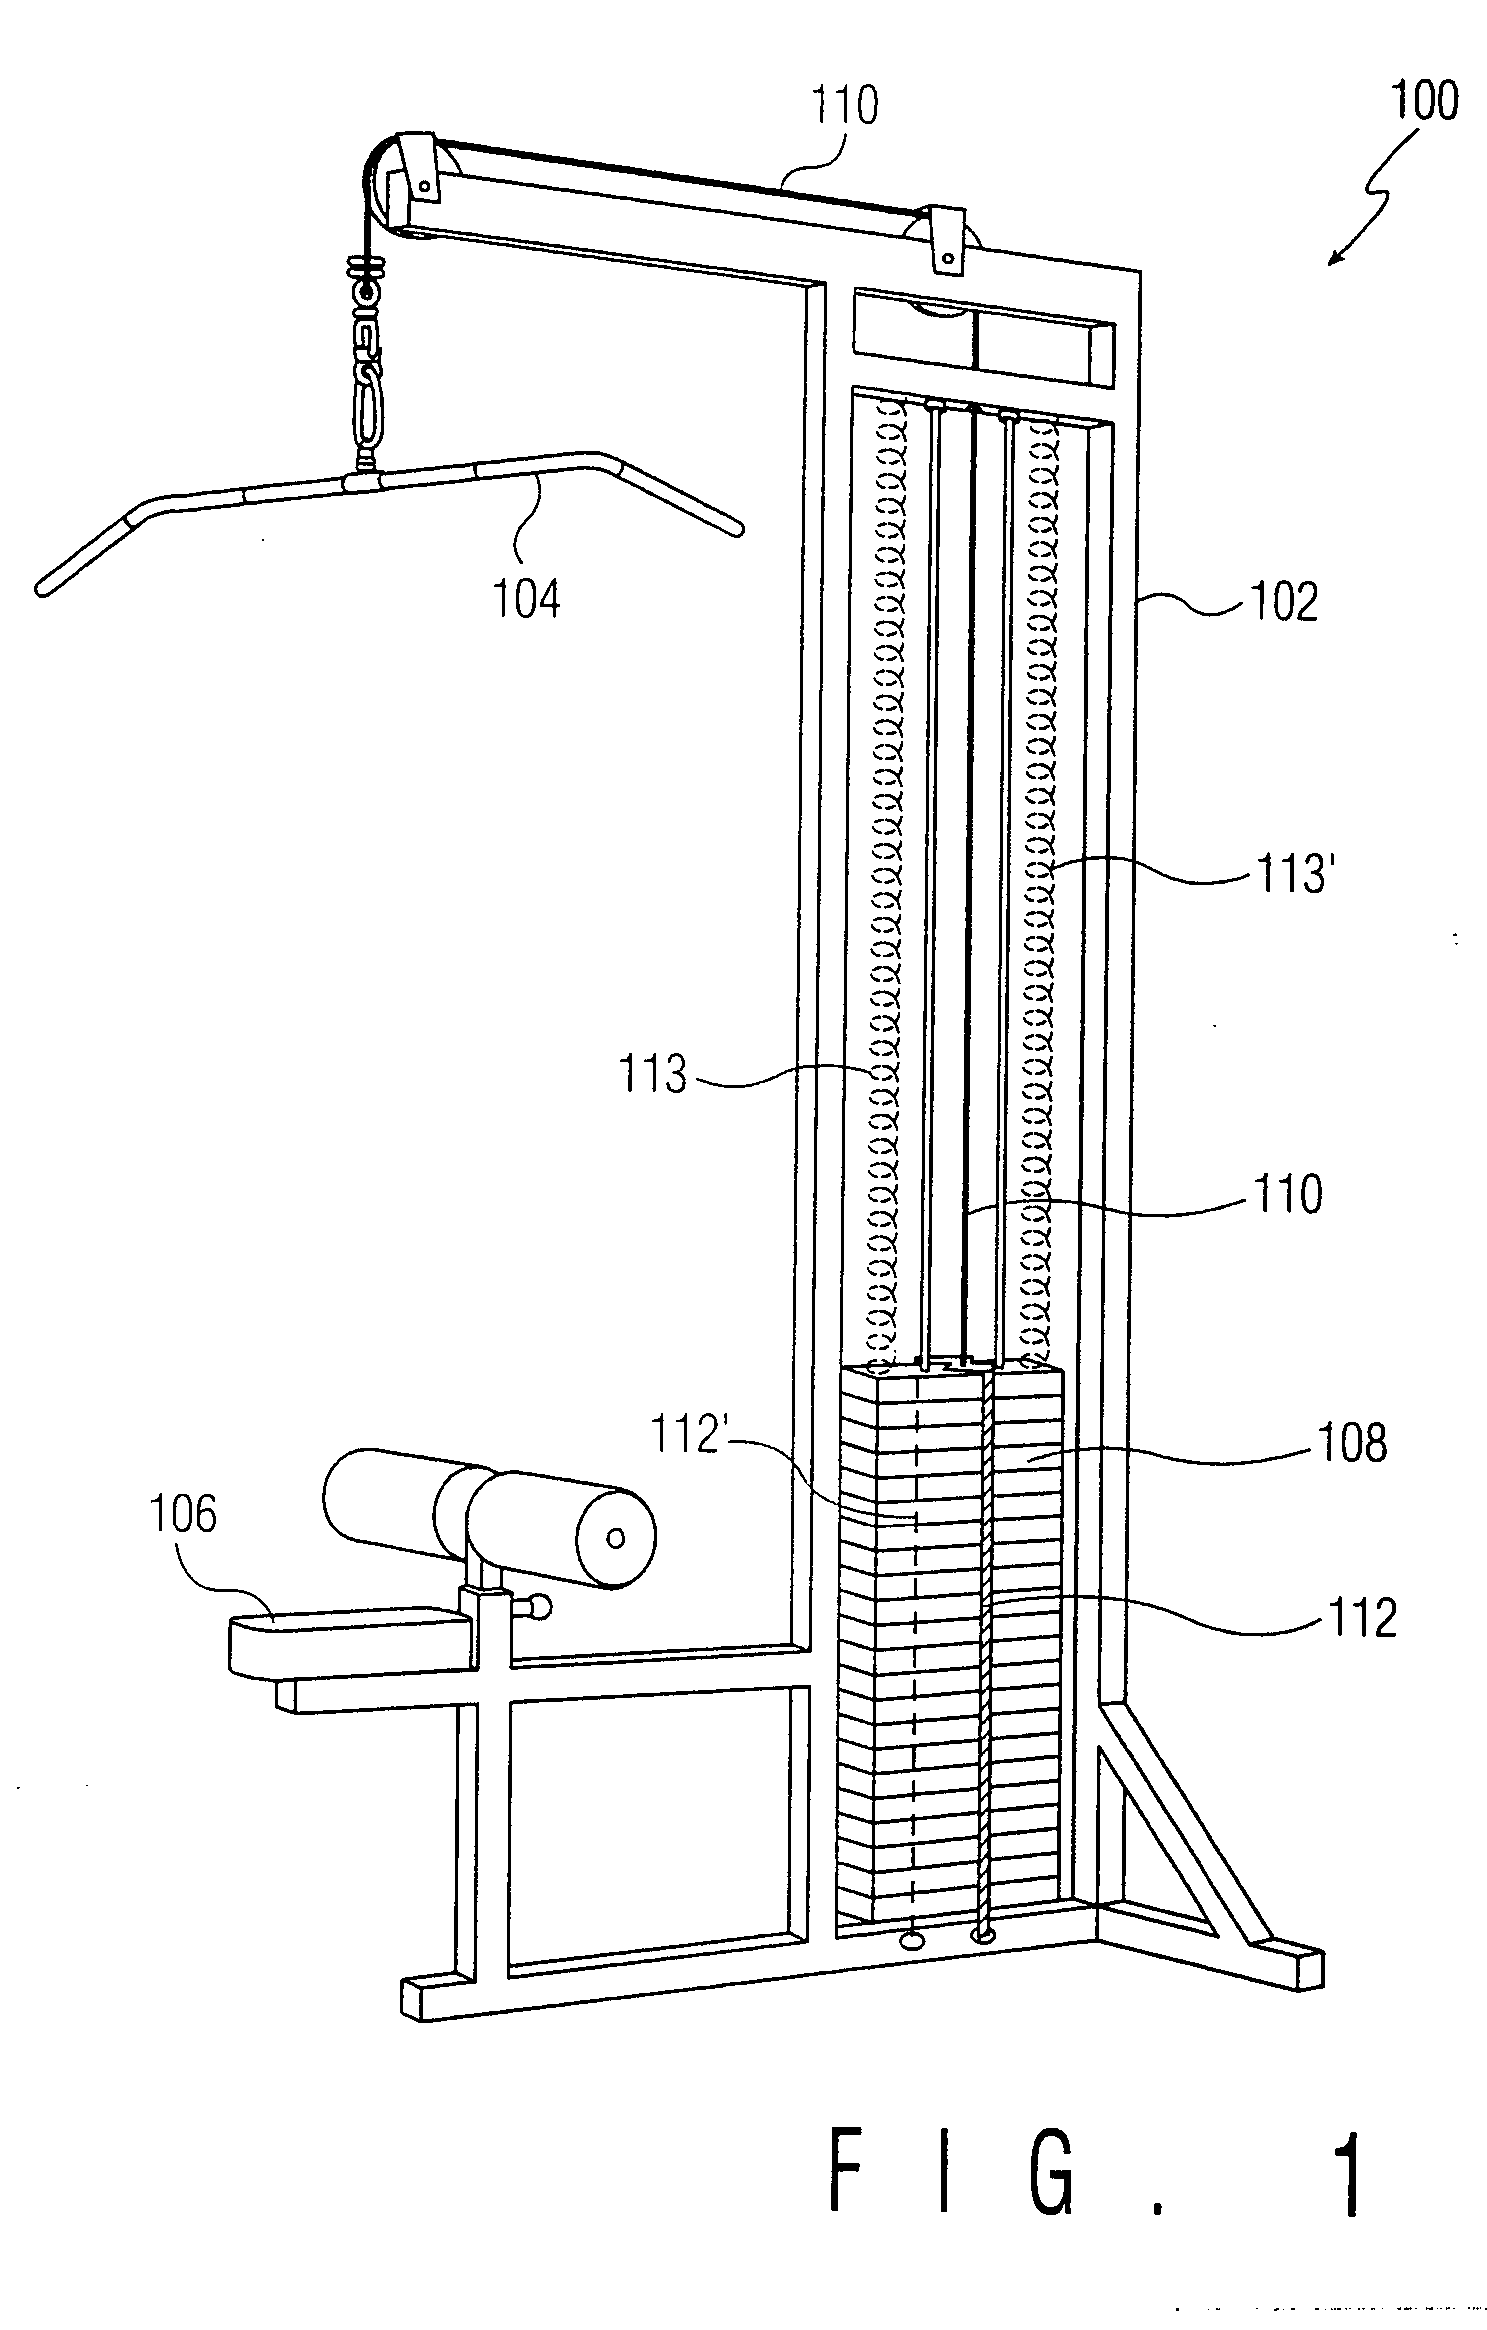 Exercise apparatus using weights and springs for high-speed training